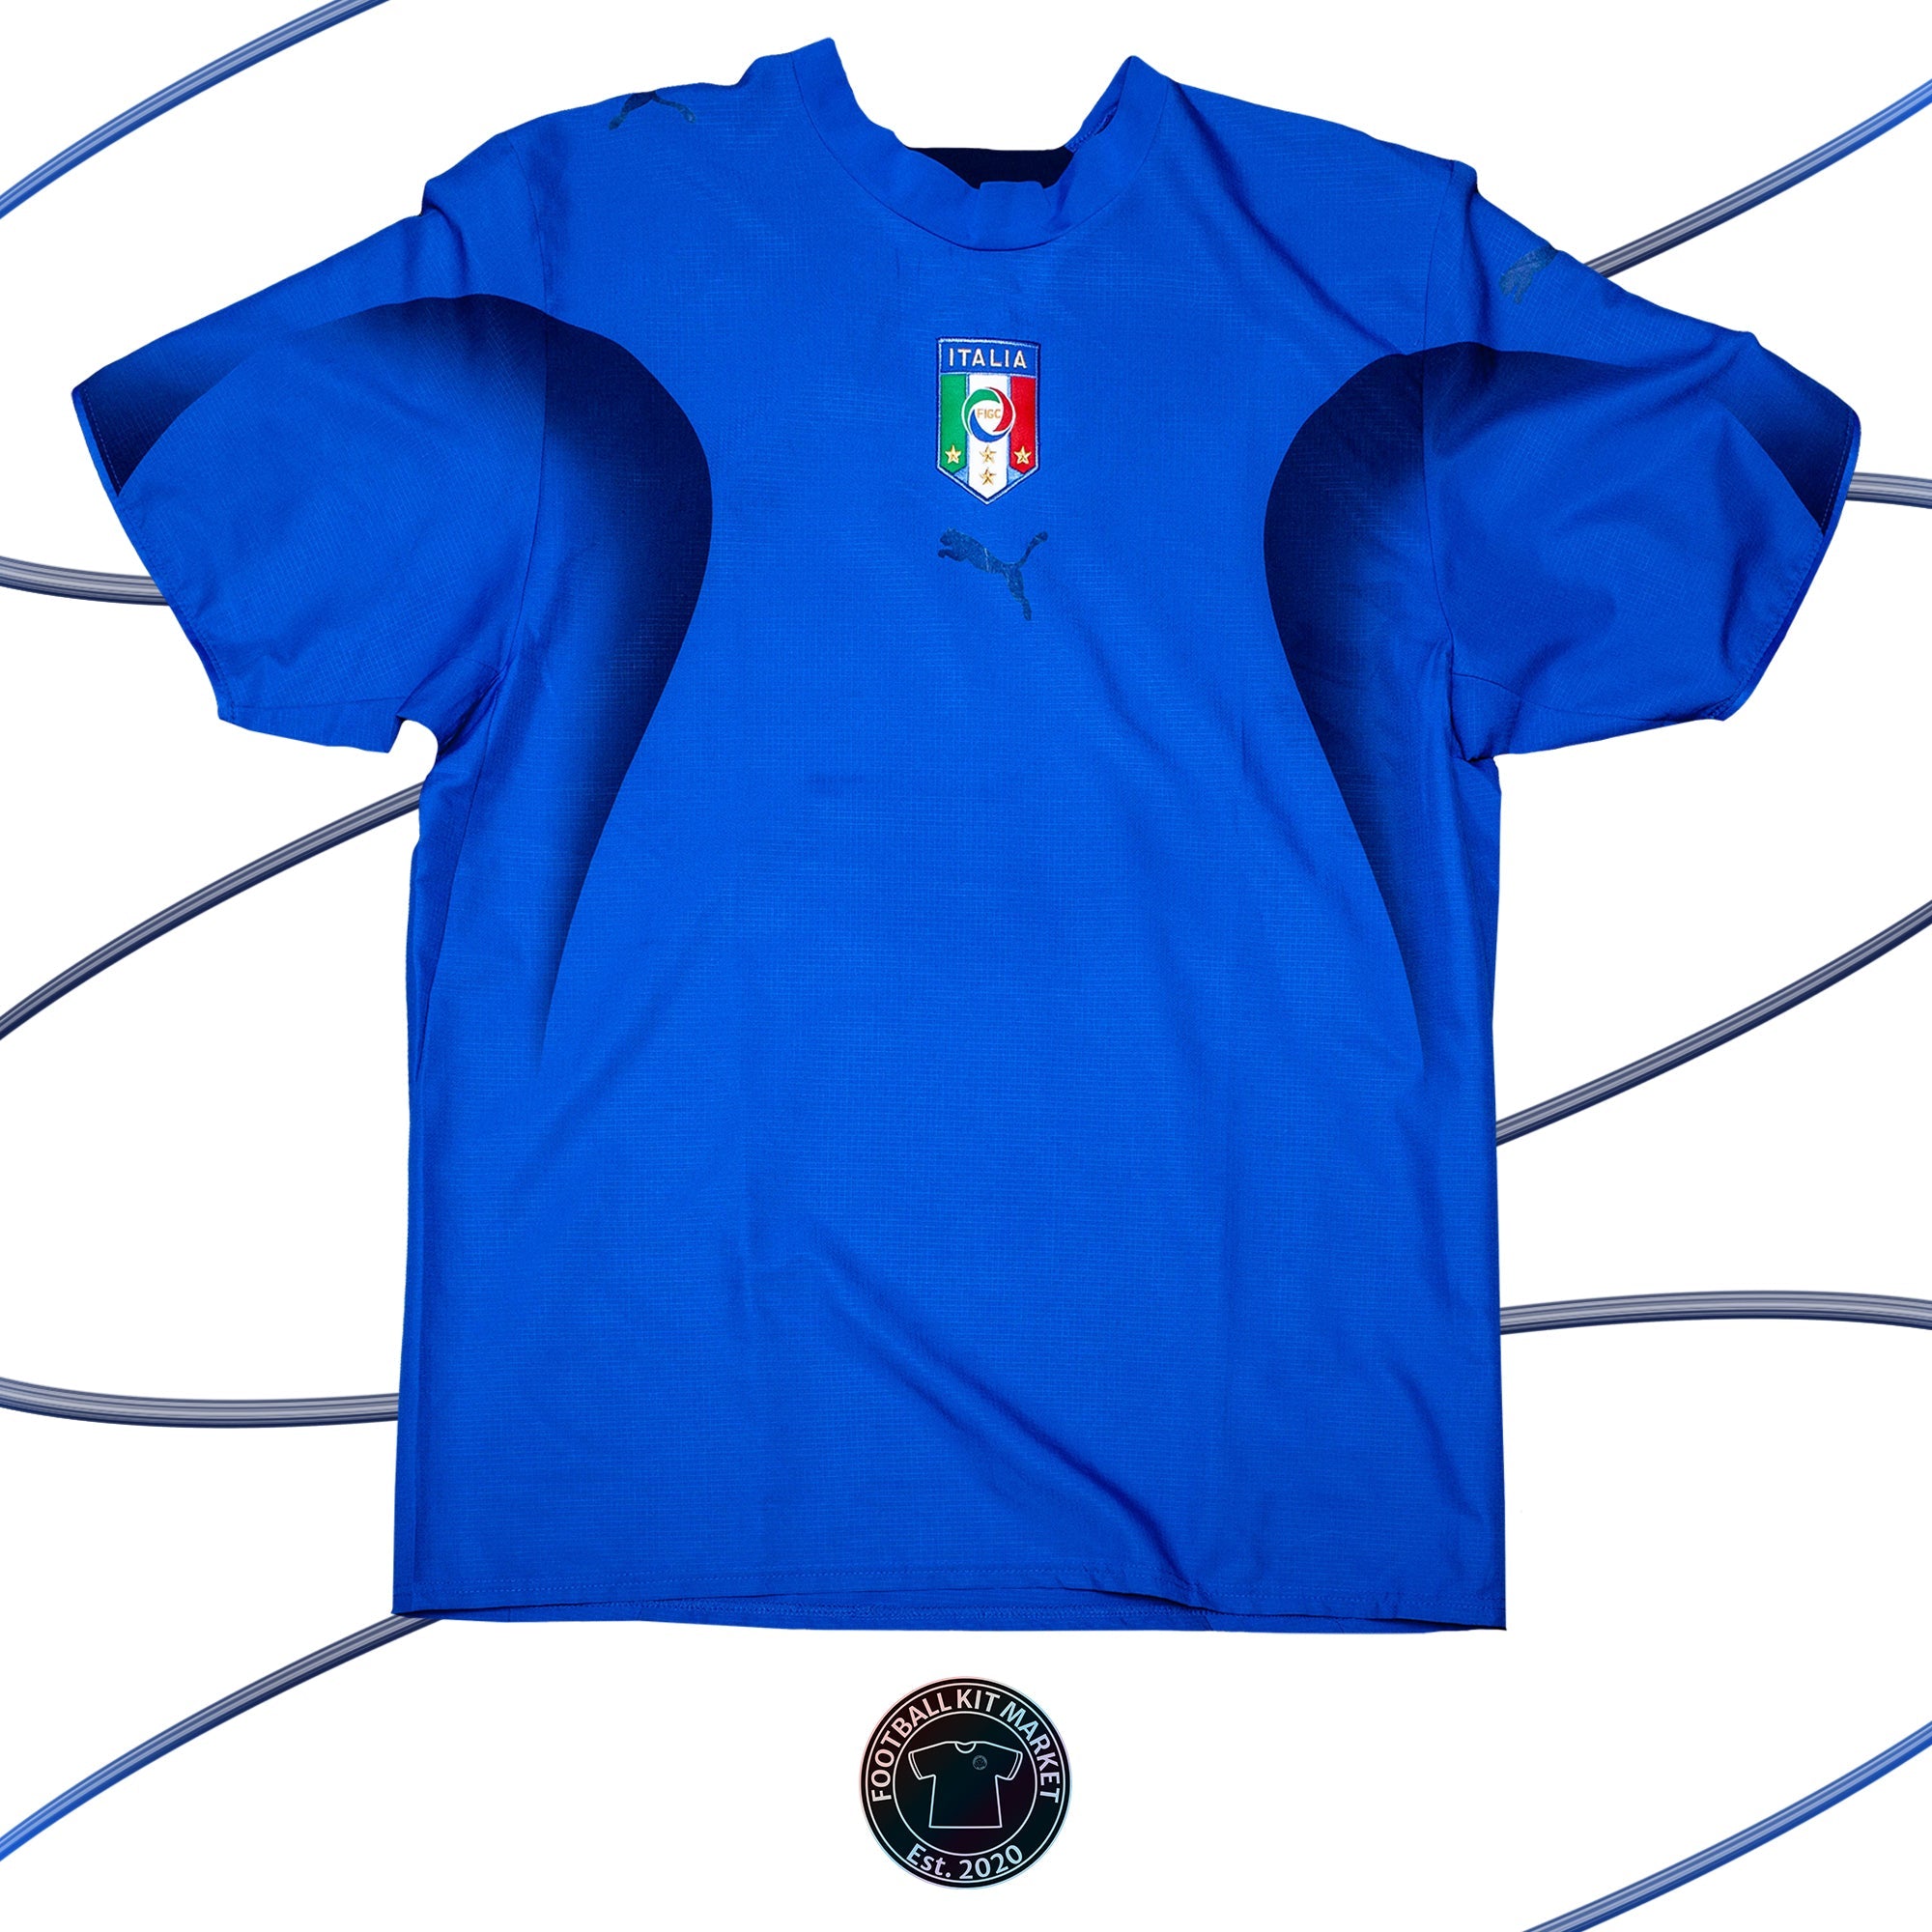 Genuine ITALY Home (2005-2006) - PUMA (L) - Product Image from Football Kit Market